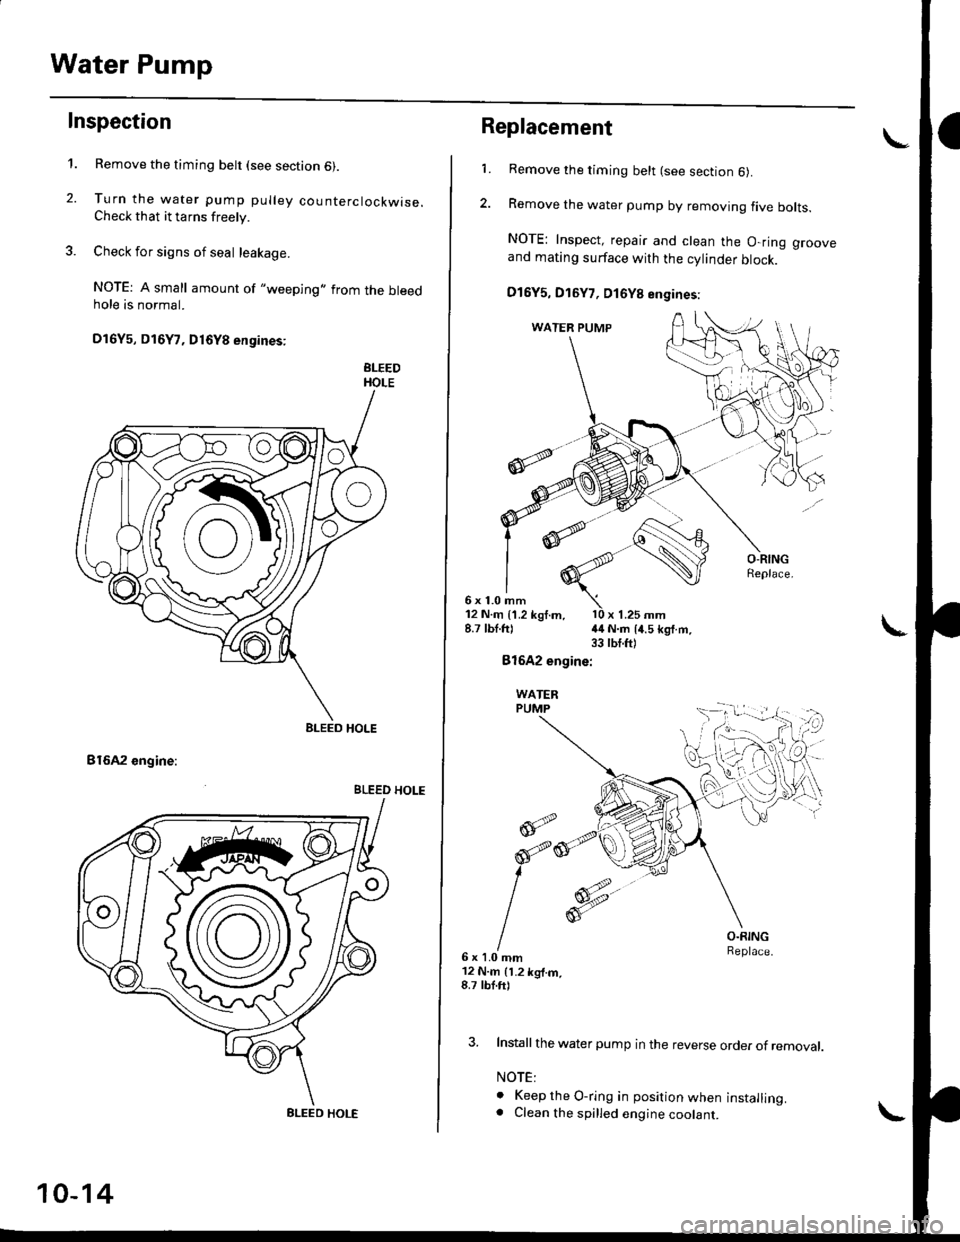 HONDA CIVIC 1996 6.G Workshop Manual Water Pump
Inspection
t.
2.
Remove the timing belt (see section 6).
Turn the water pump pulley counterclockwise.Check that it tarns freely.
Check for signs of seal leakage.
NOTE: A small amount of "w